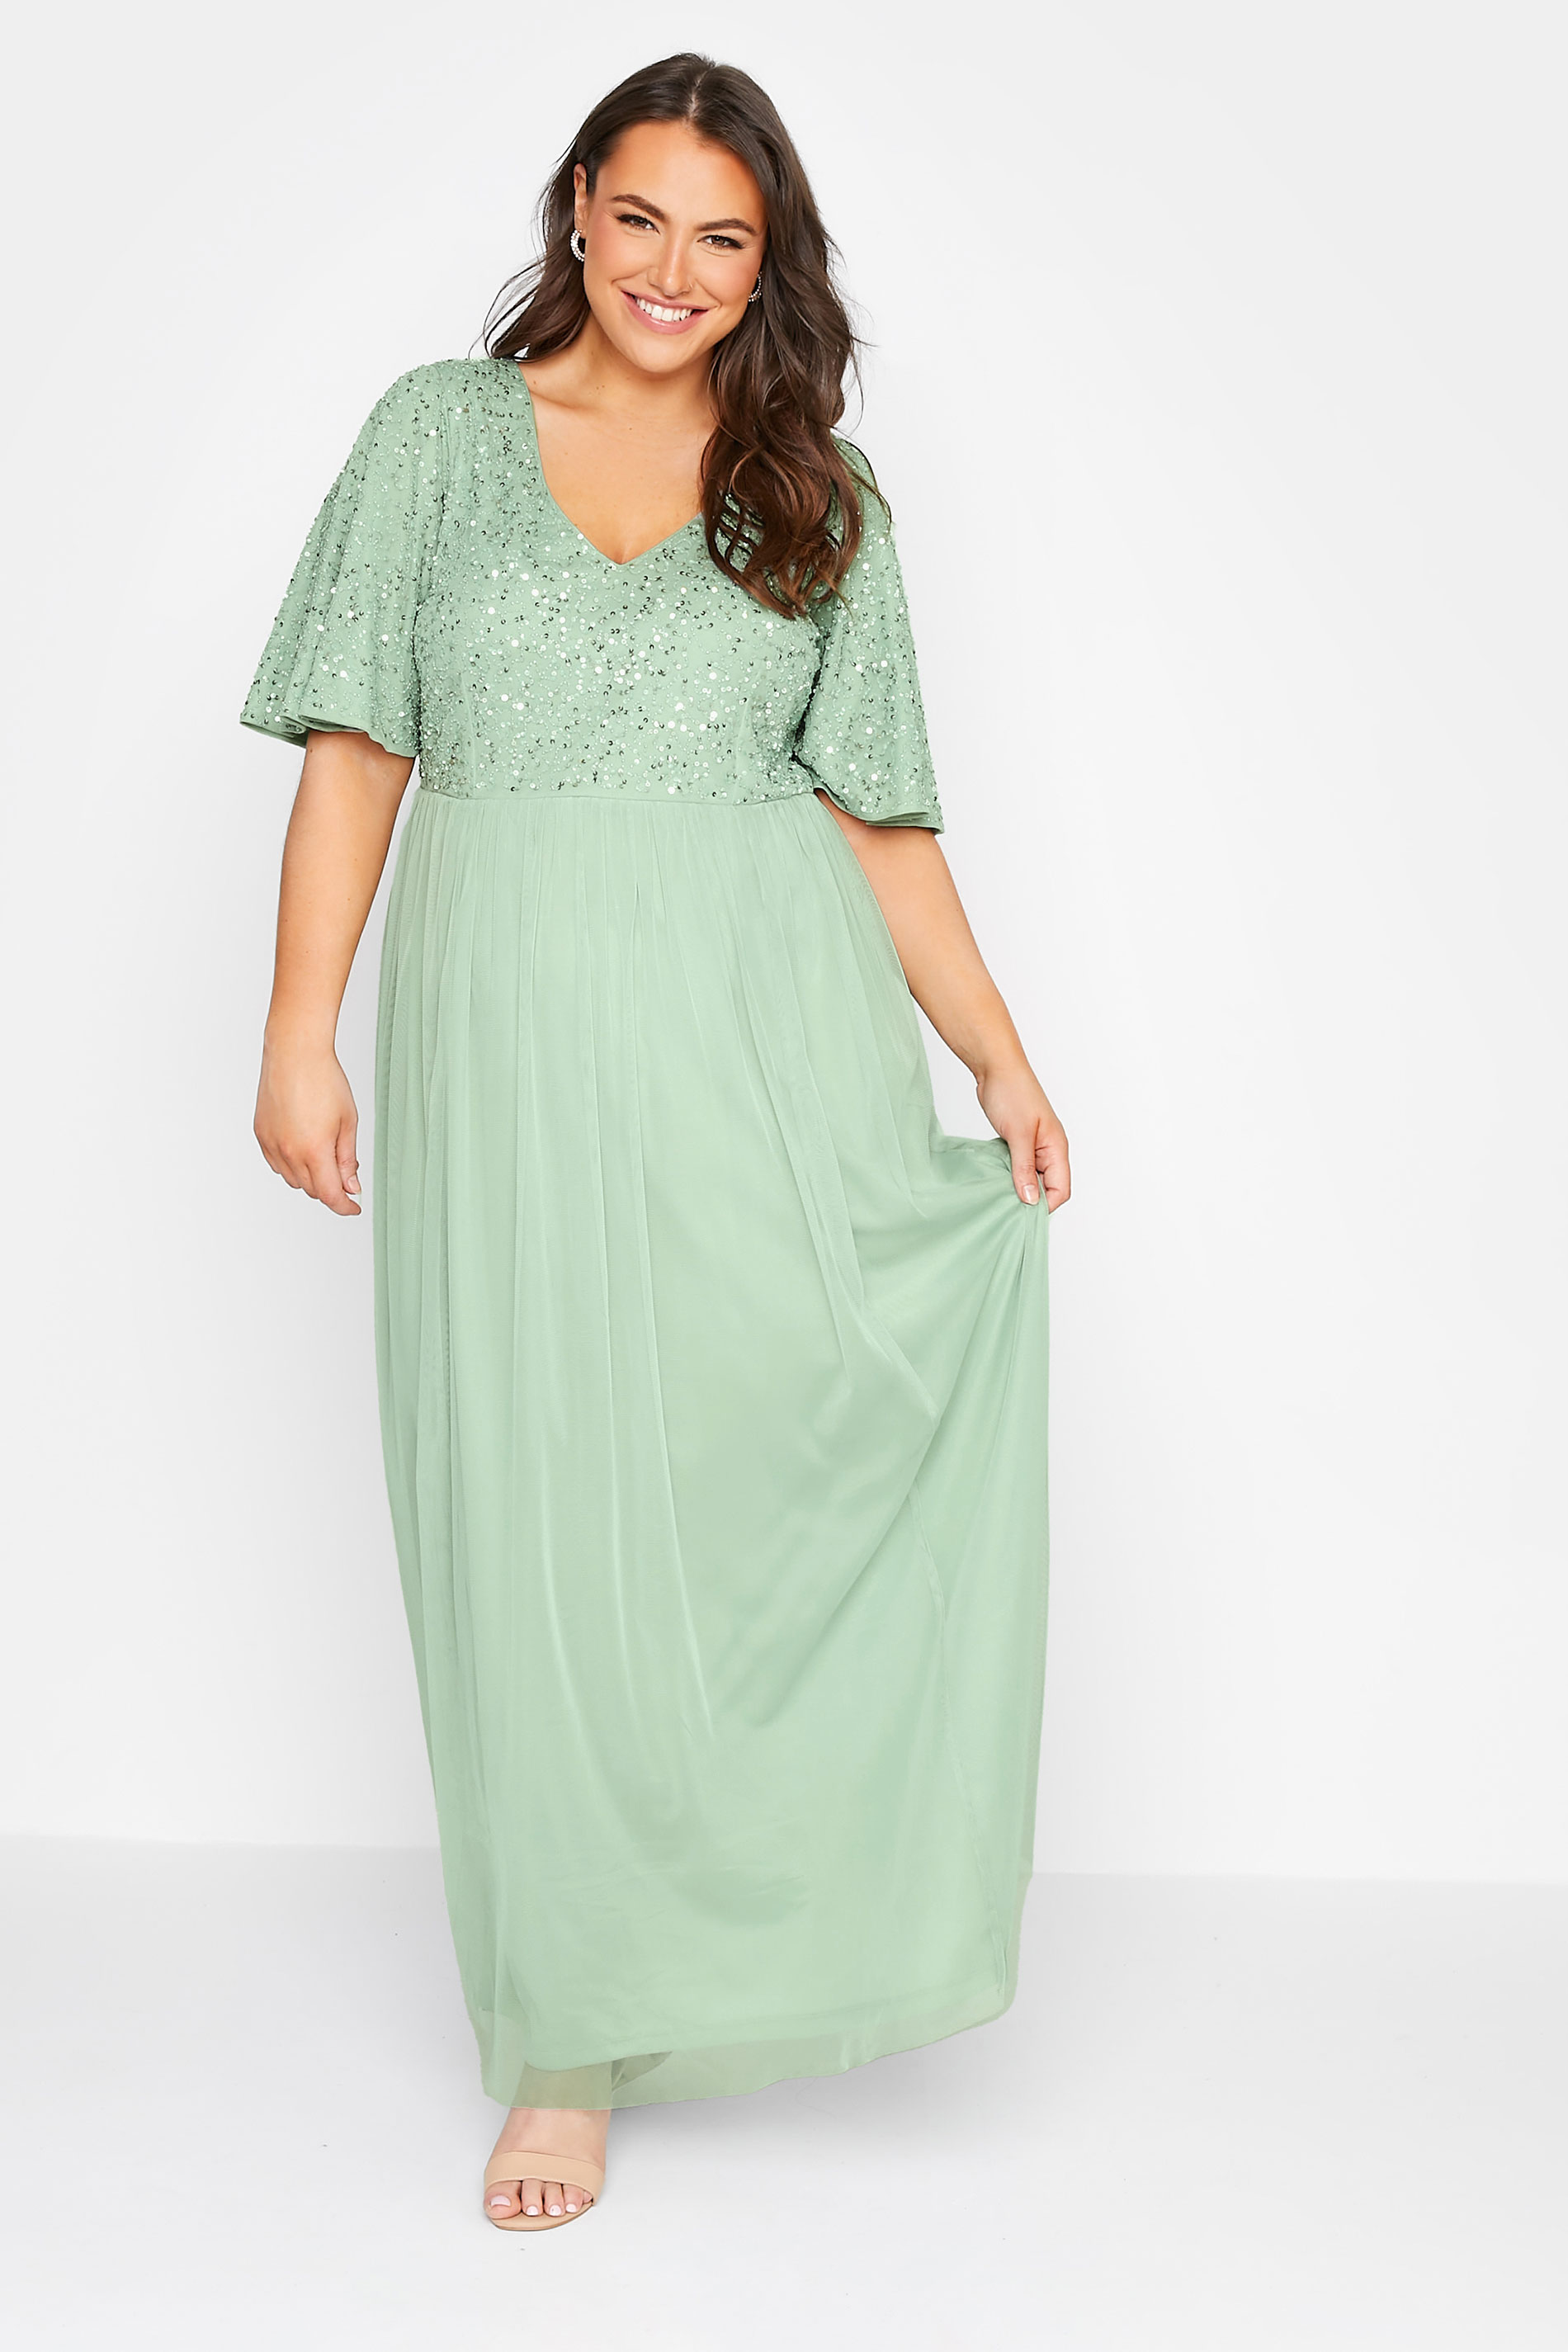 LUXE Curve Sage Green Sequin Embellished Maxi Dress_A.jpg